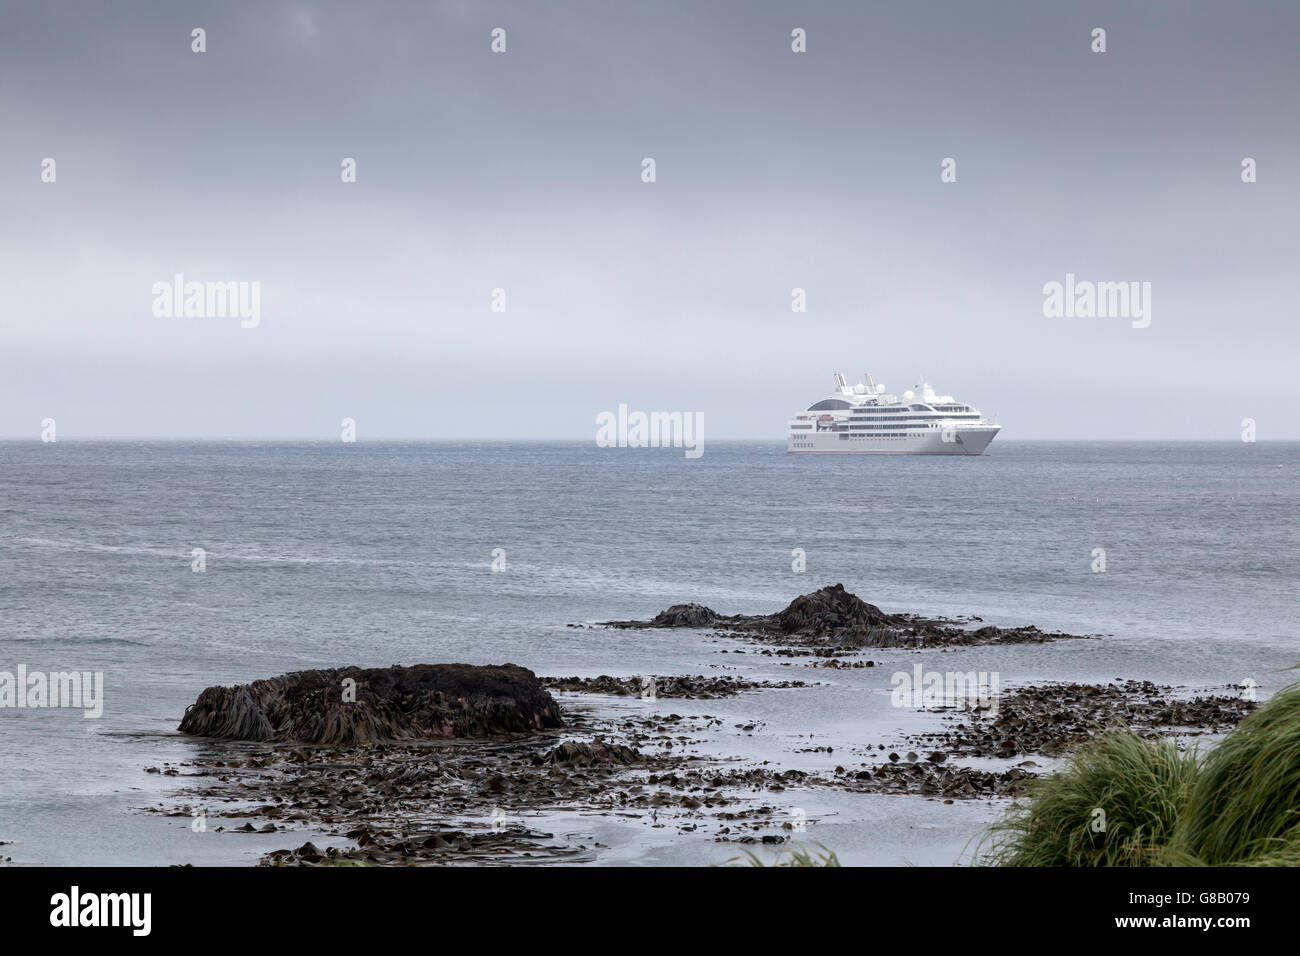 French expeditrion ship Le Soleal anchored off Macquarie Island, Australian sub-Antarctic Stock Photo